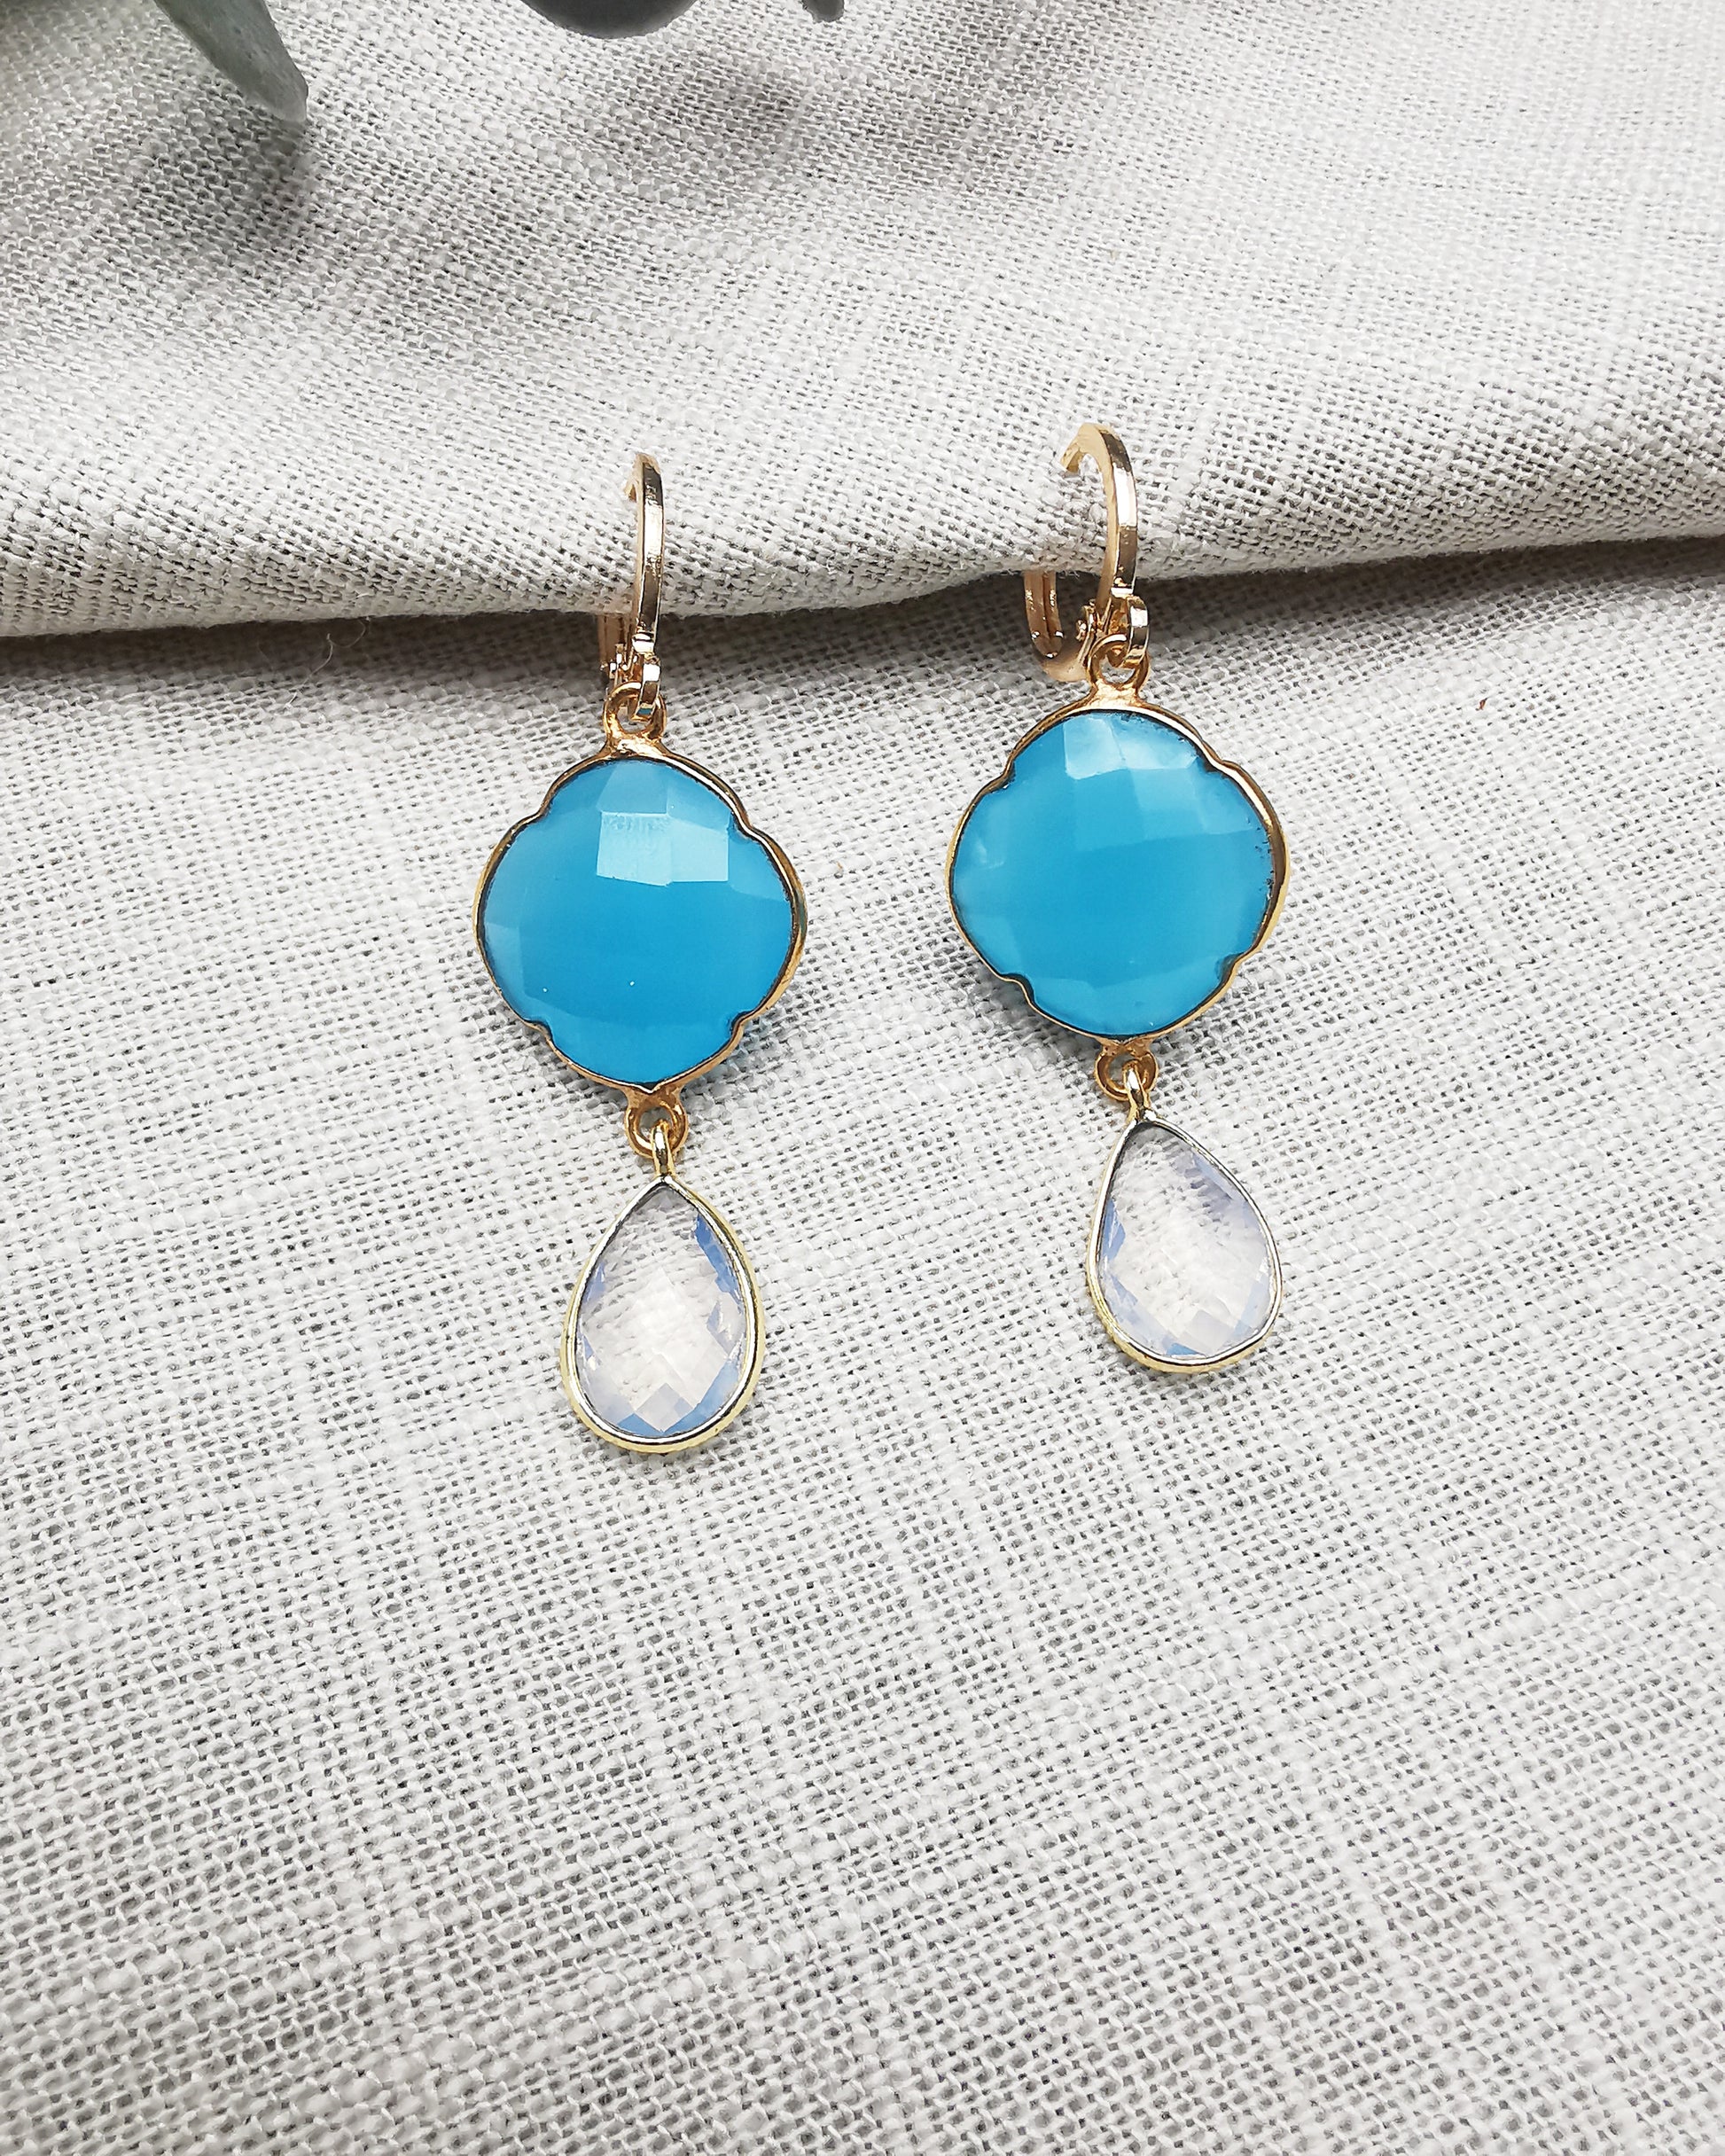 Blue Chalcedony and Opalite Clover Earrings - LIMITED EDITION - Vinta Shop